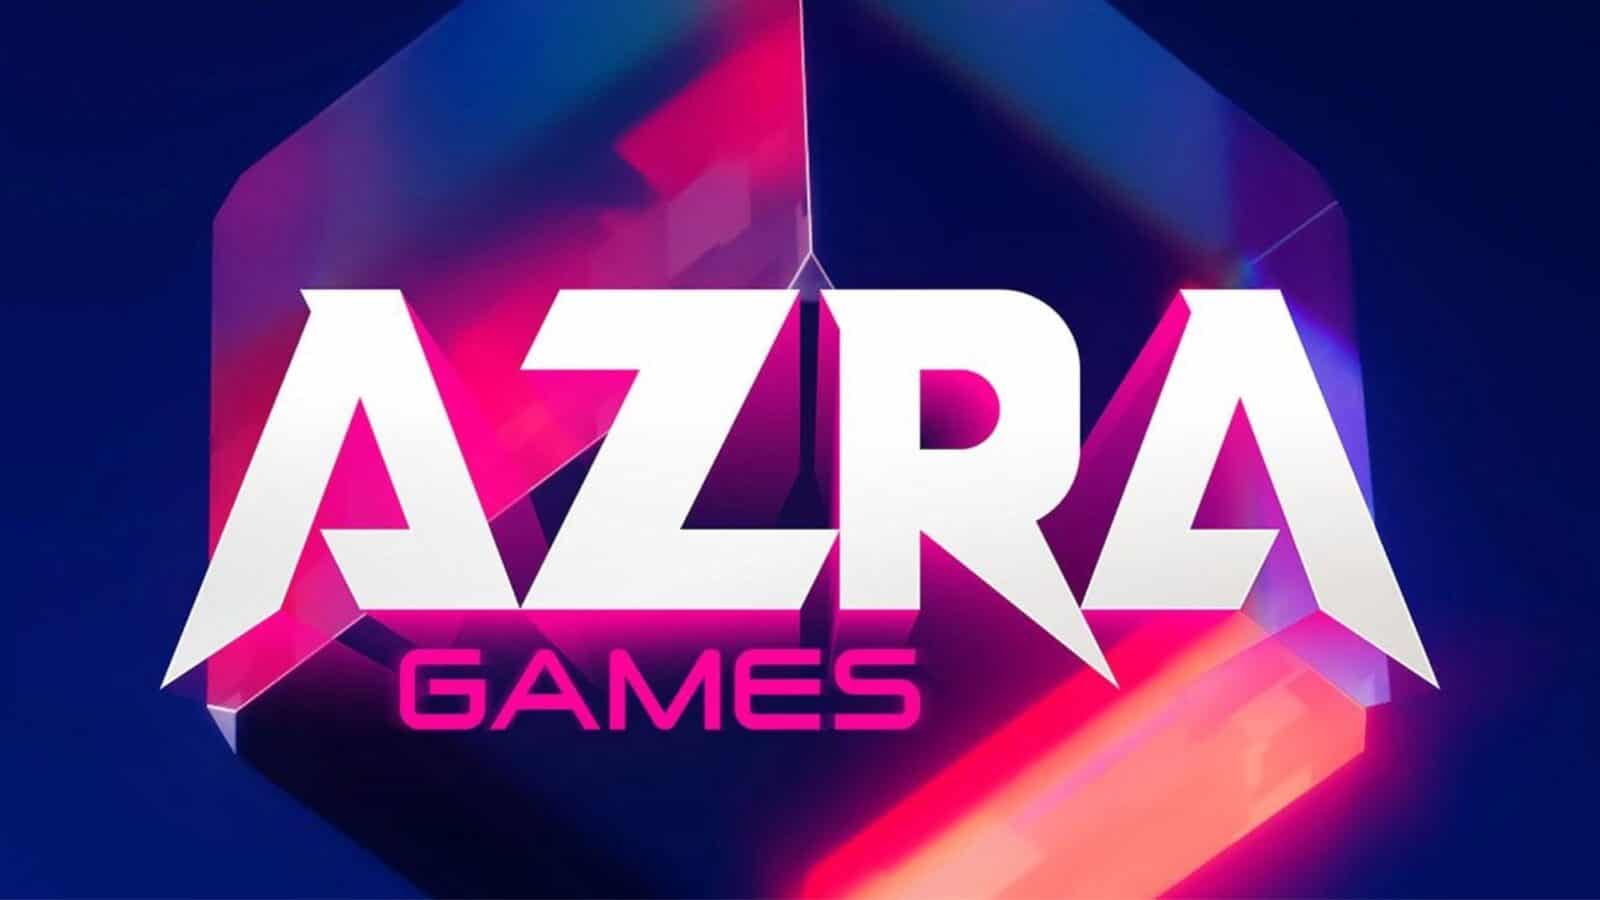 Azra Games Raises M From A16z For NFT-themed Legions & Legends